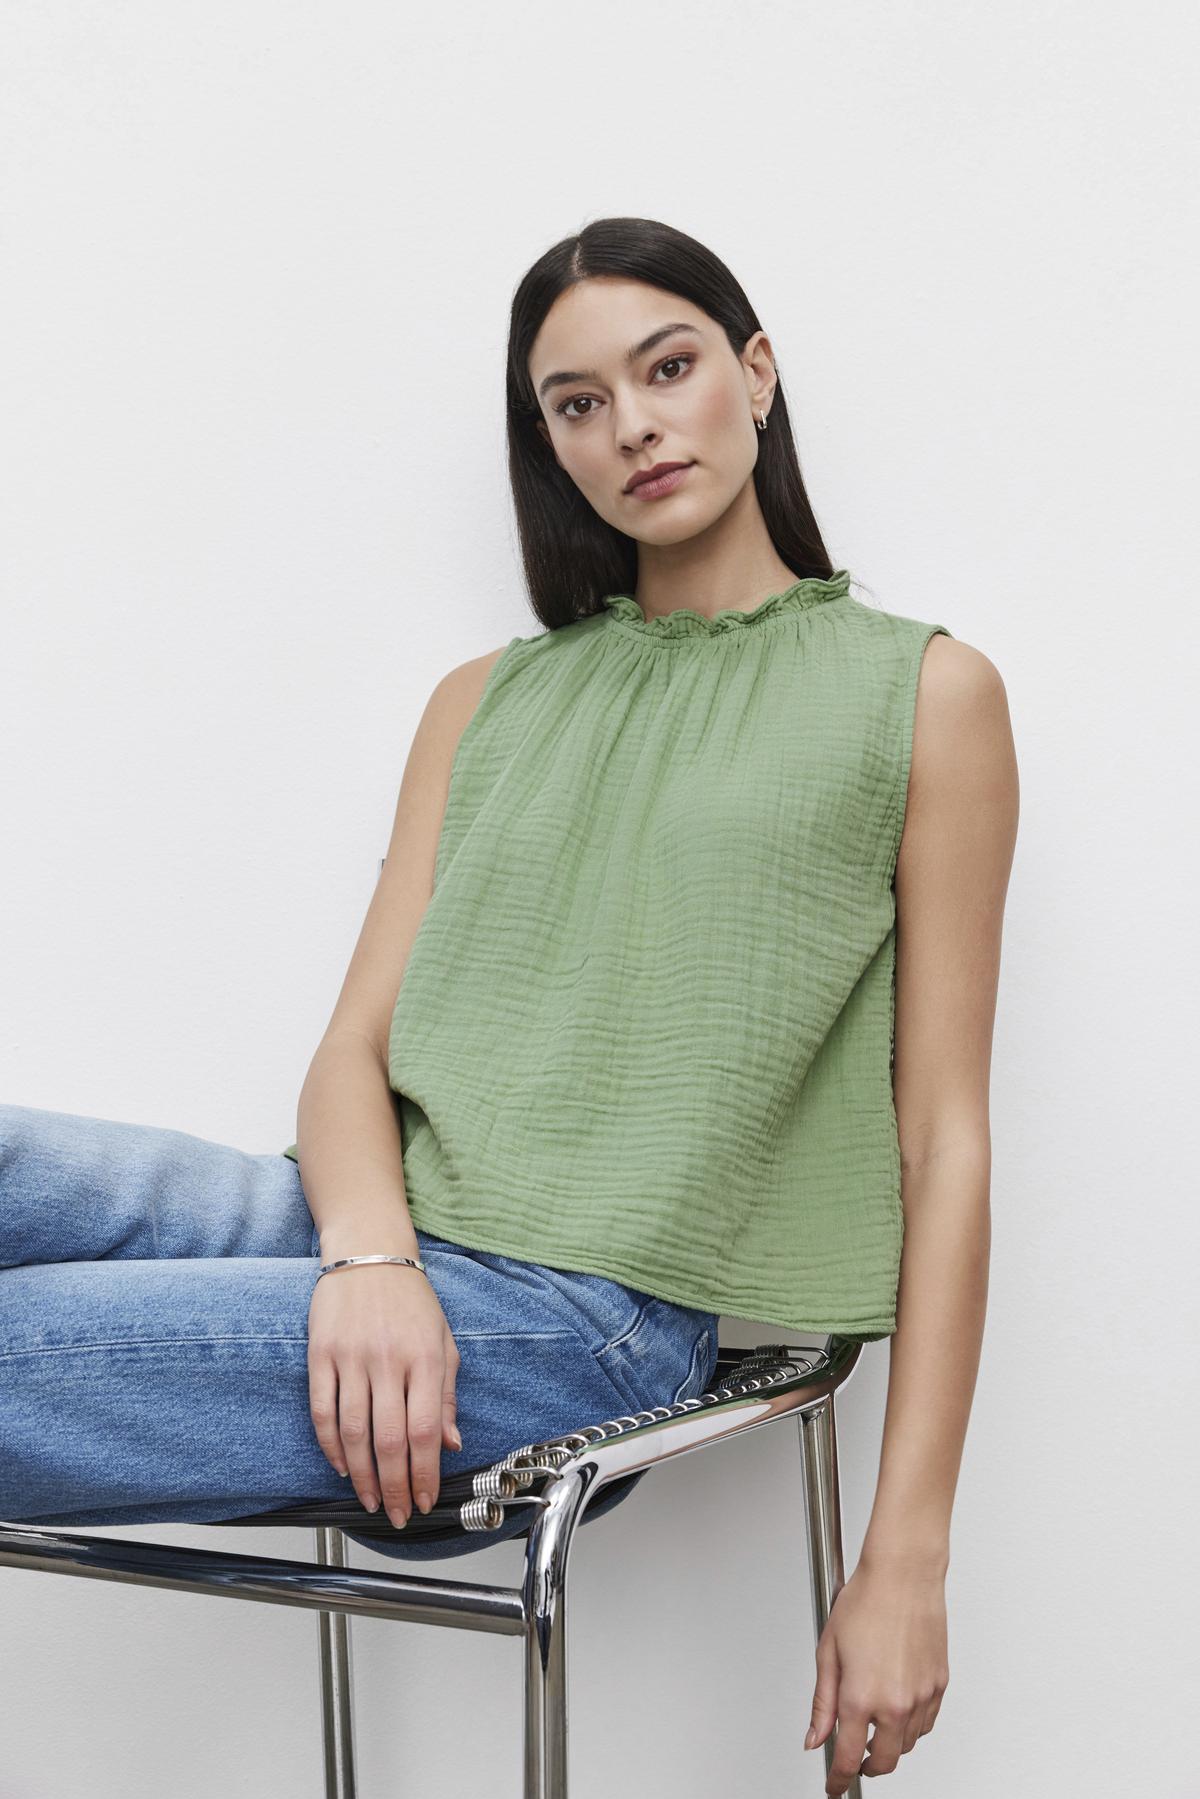   Woman in a green Velvet by Graham & Spencer BIANCA COTTON GAUZE TANK TOP with an elastic neckline and blue jeans sitting on a chrome chair against a white background. 